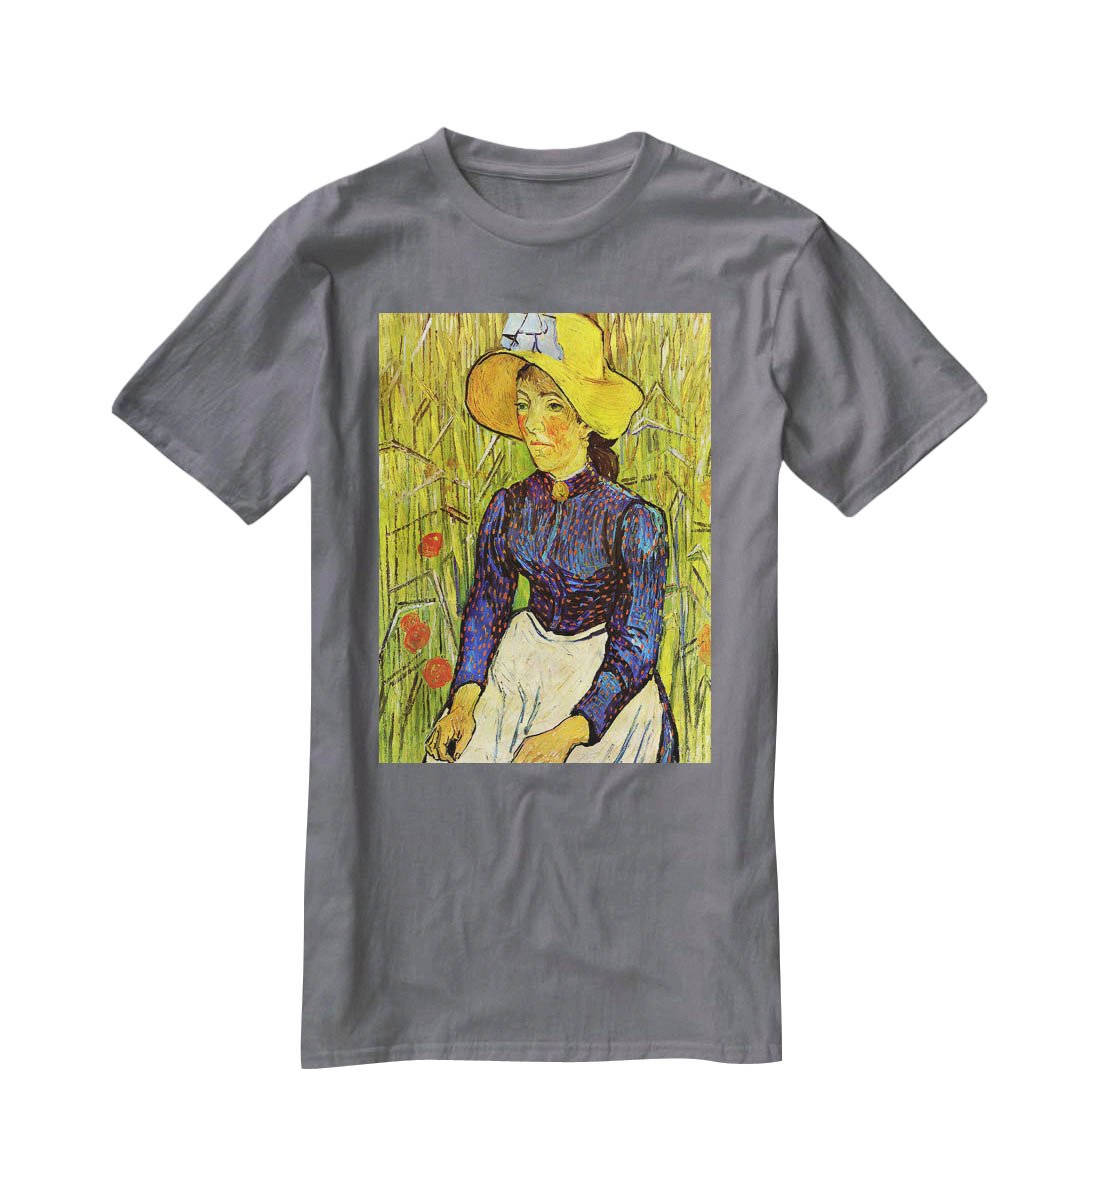 Young Peasant Woman with Straw Hat Sitting in the Wheat by Van Gogh T-Shirt - Canvas Art Rocks - 3